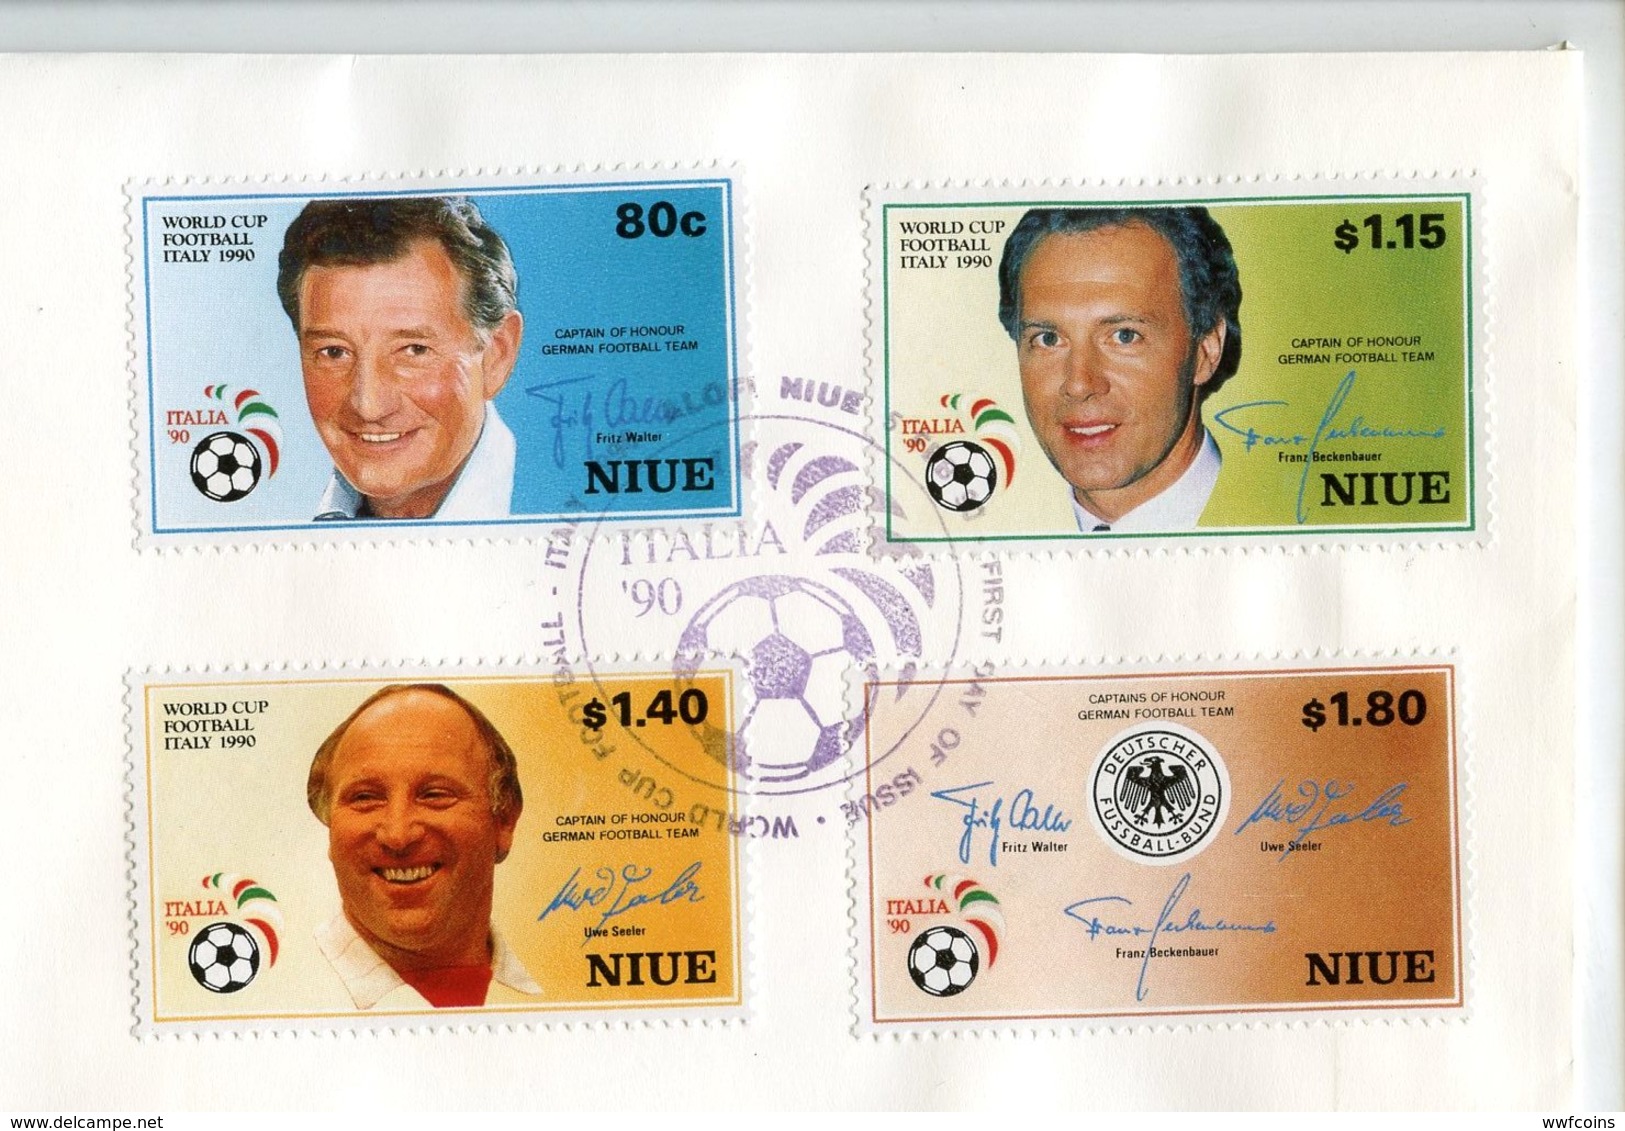 POSTCARD STAMP BUSTA FRANCOBOLLO NIUE 5 $ 1990 THE HONORARY CAPTAINS OF GERMAN NATIONAL FOOTBALL TEAM WORLD CUP FIRST DA - Niue